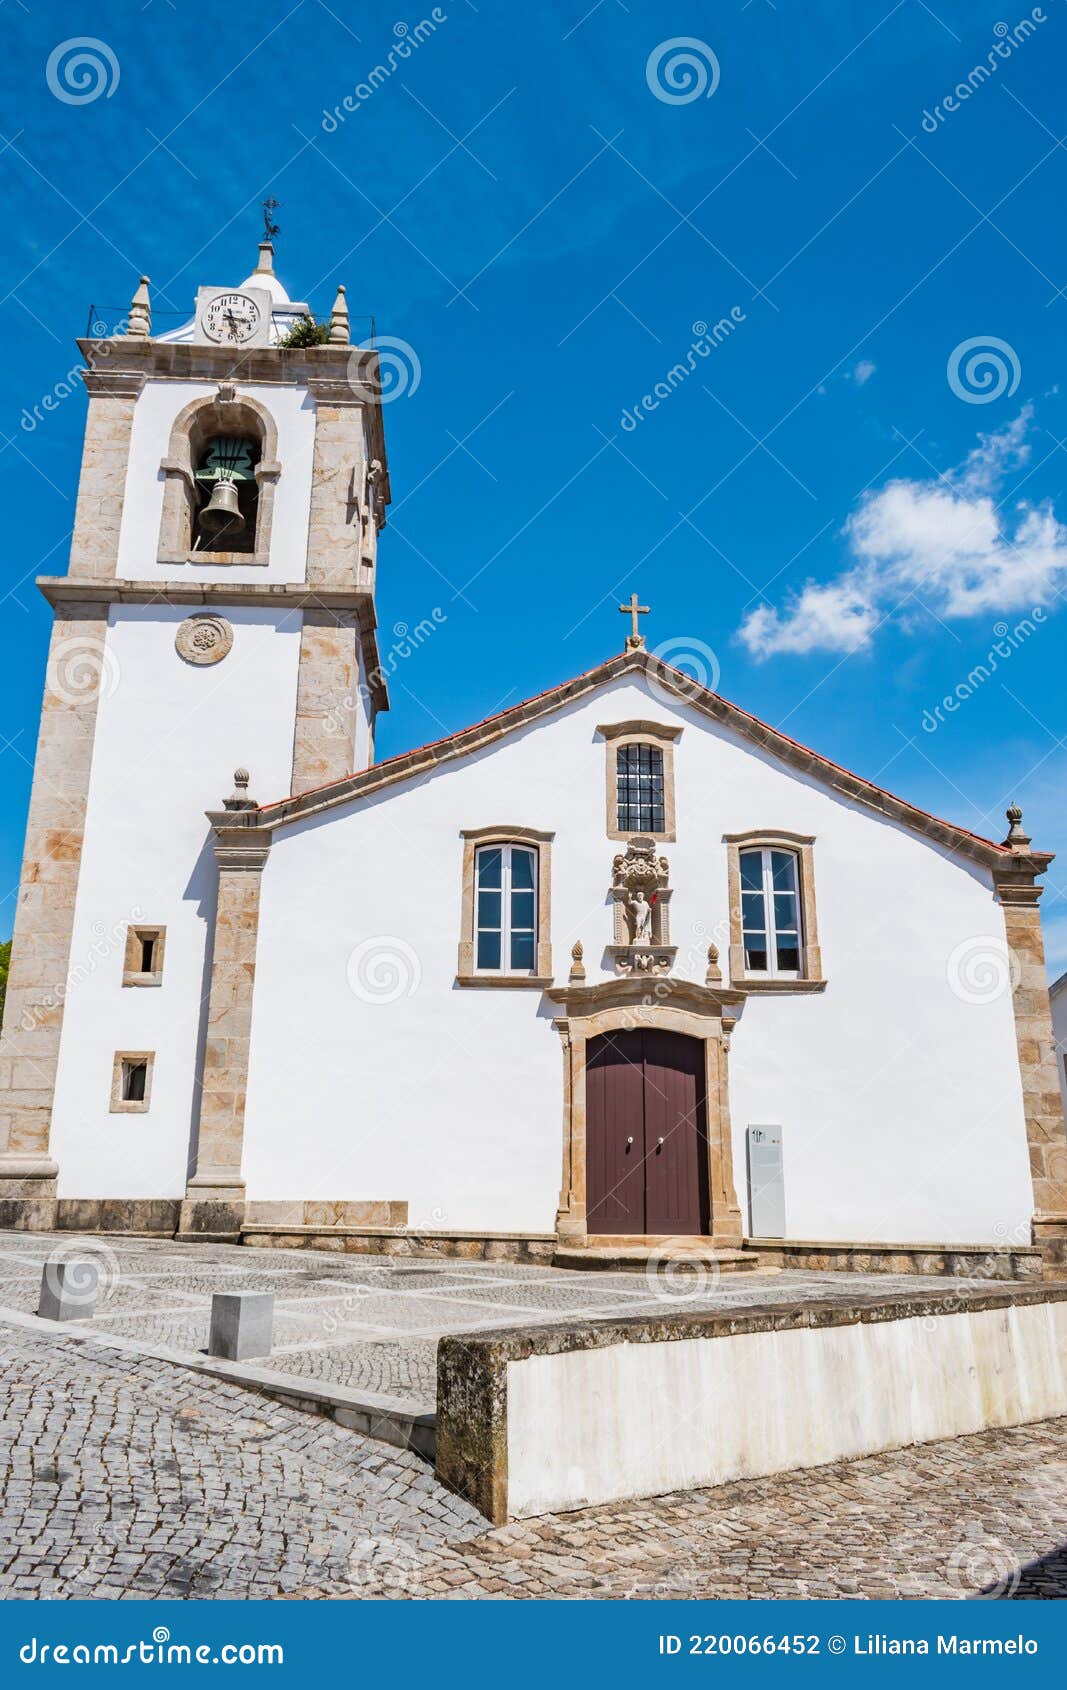 facade of the mother church of pedrogÃÂ£o pequeno, sertÃÂ£ portugal